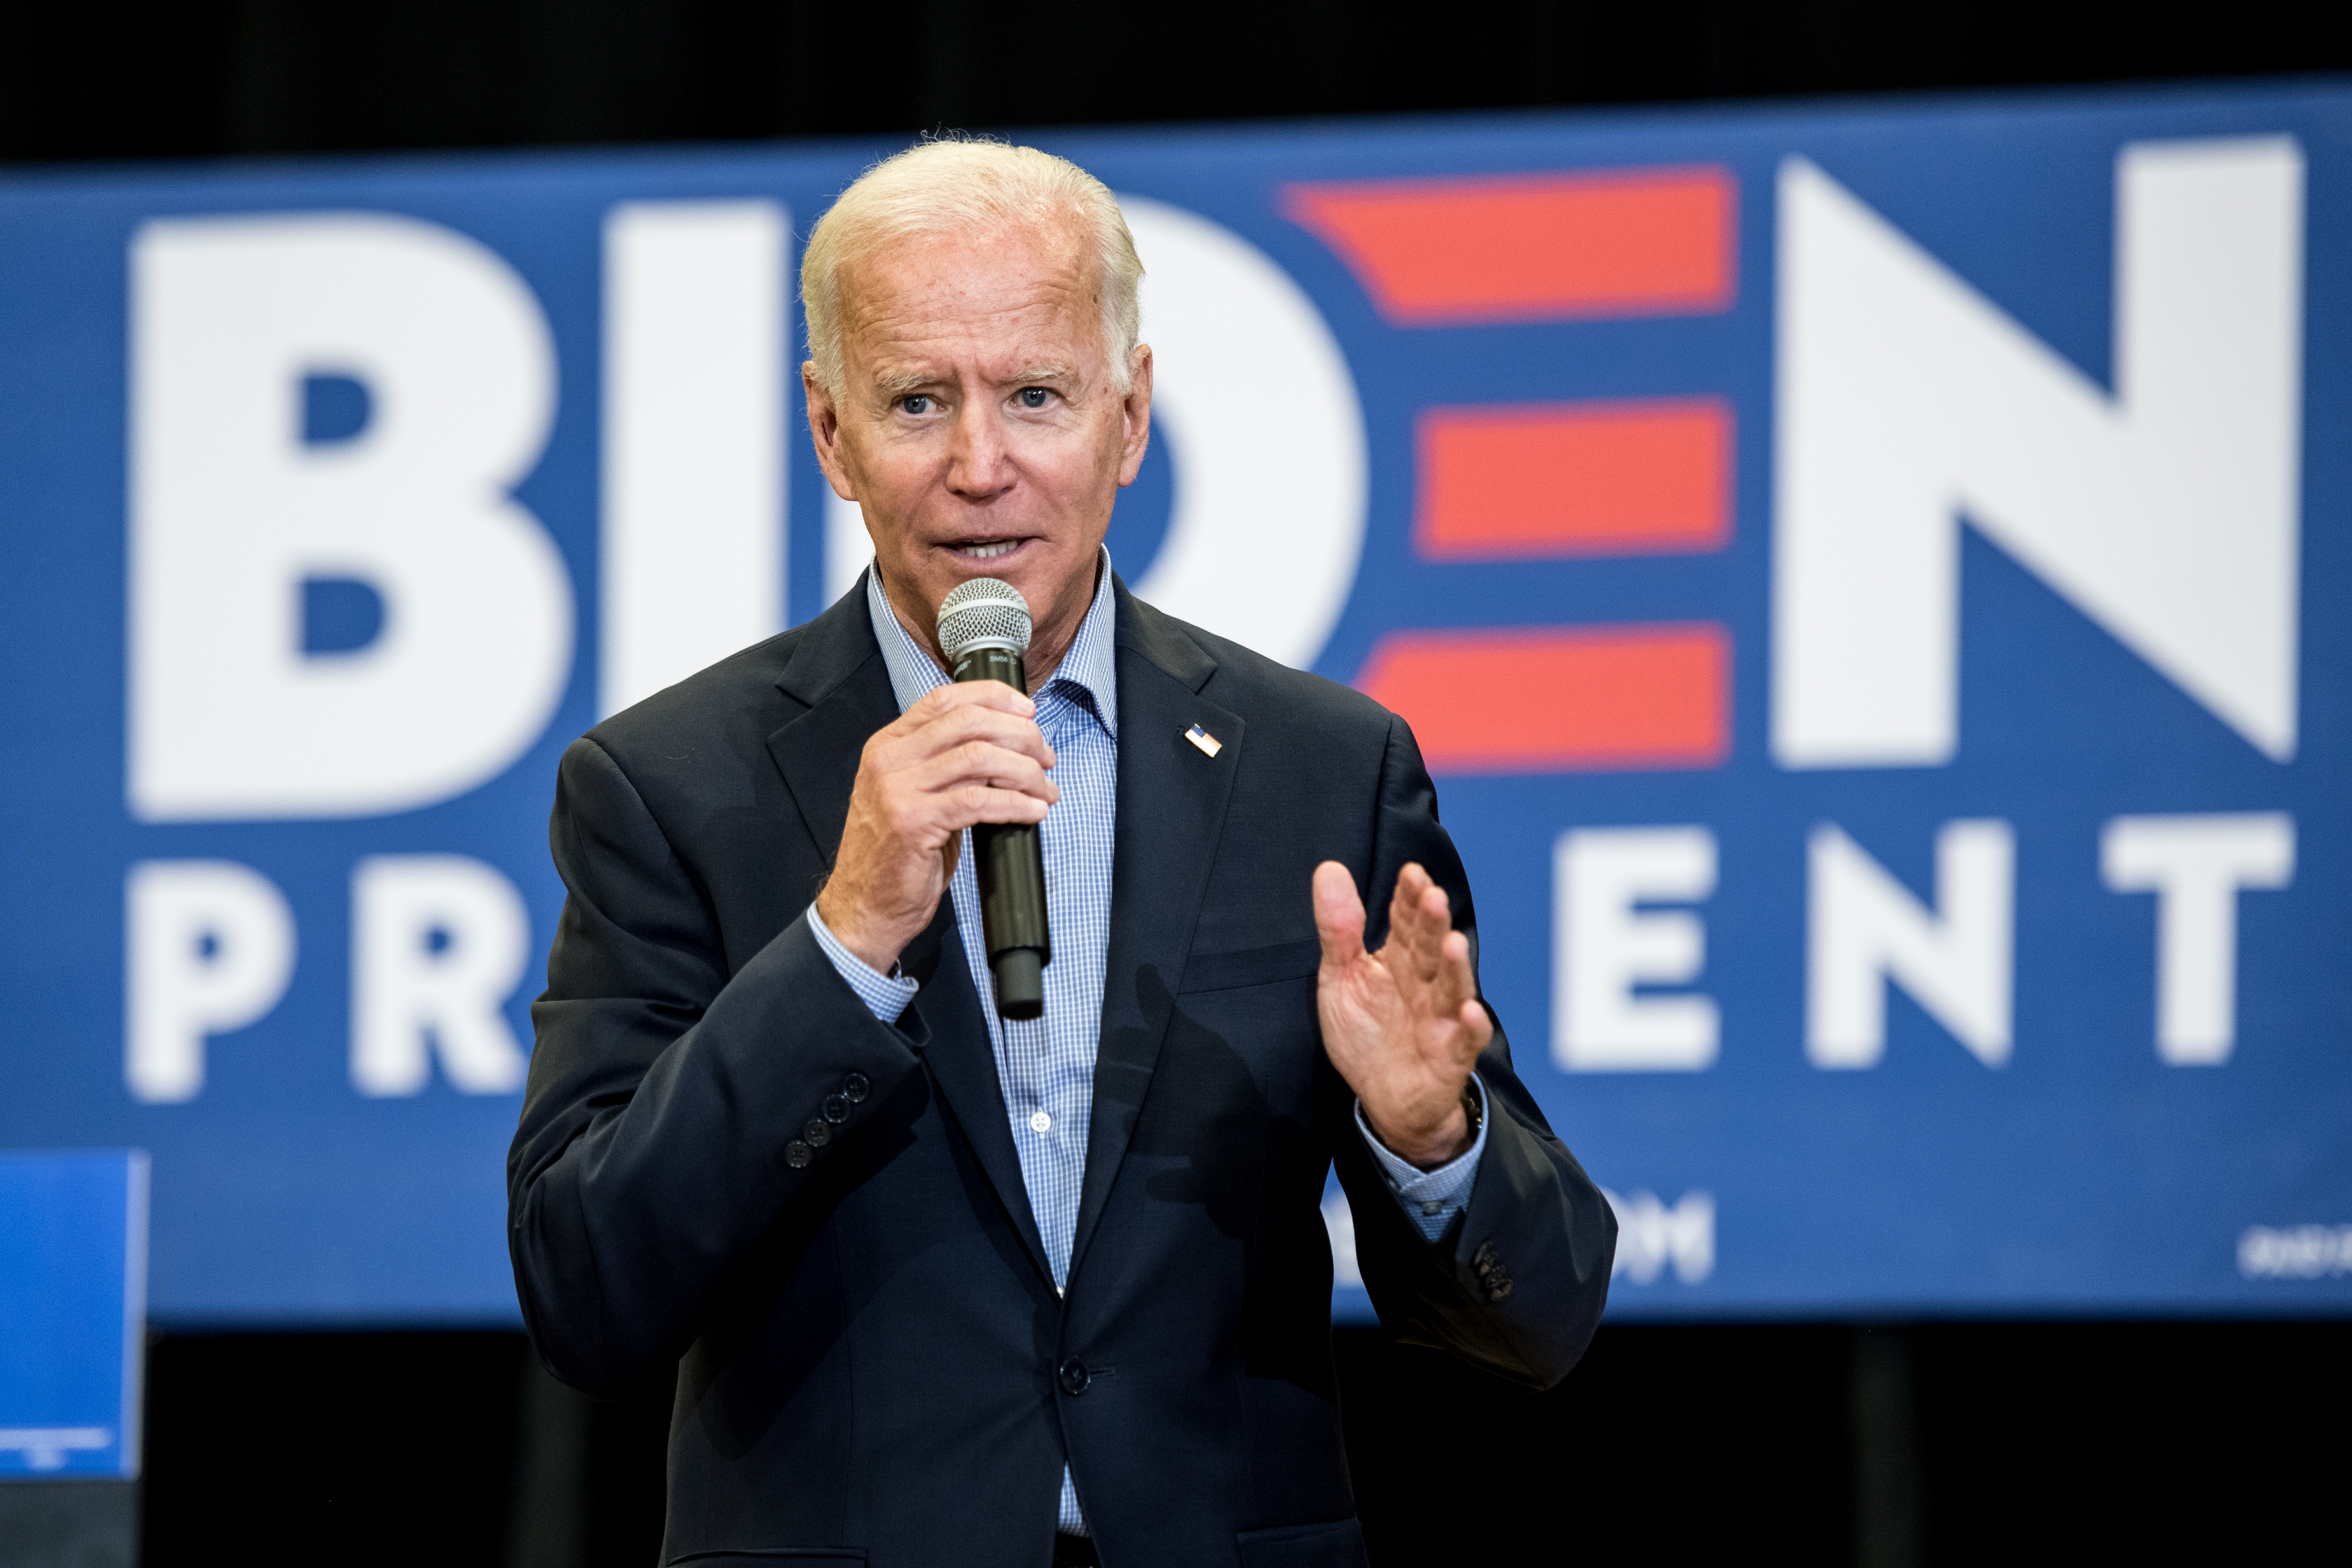 ROCK HILL, SC - AUGUST 29: Democratic presidential candidate and former US Vice President Joe Biden addresses a crowd at a town hall event at Clinton College on August 29, 2019 in Rock Hill, South Carolina. Biden spent Wednesday and Thursday campaigning in the early primary state. (Photo by Sean Rayford/Getty Images)